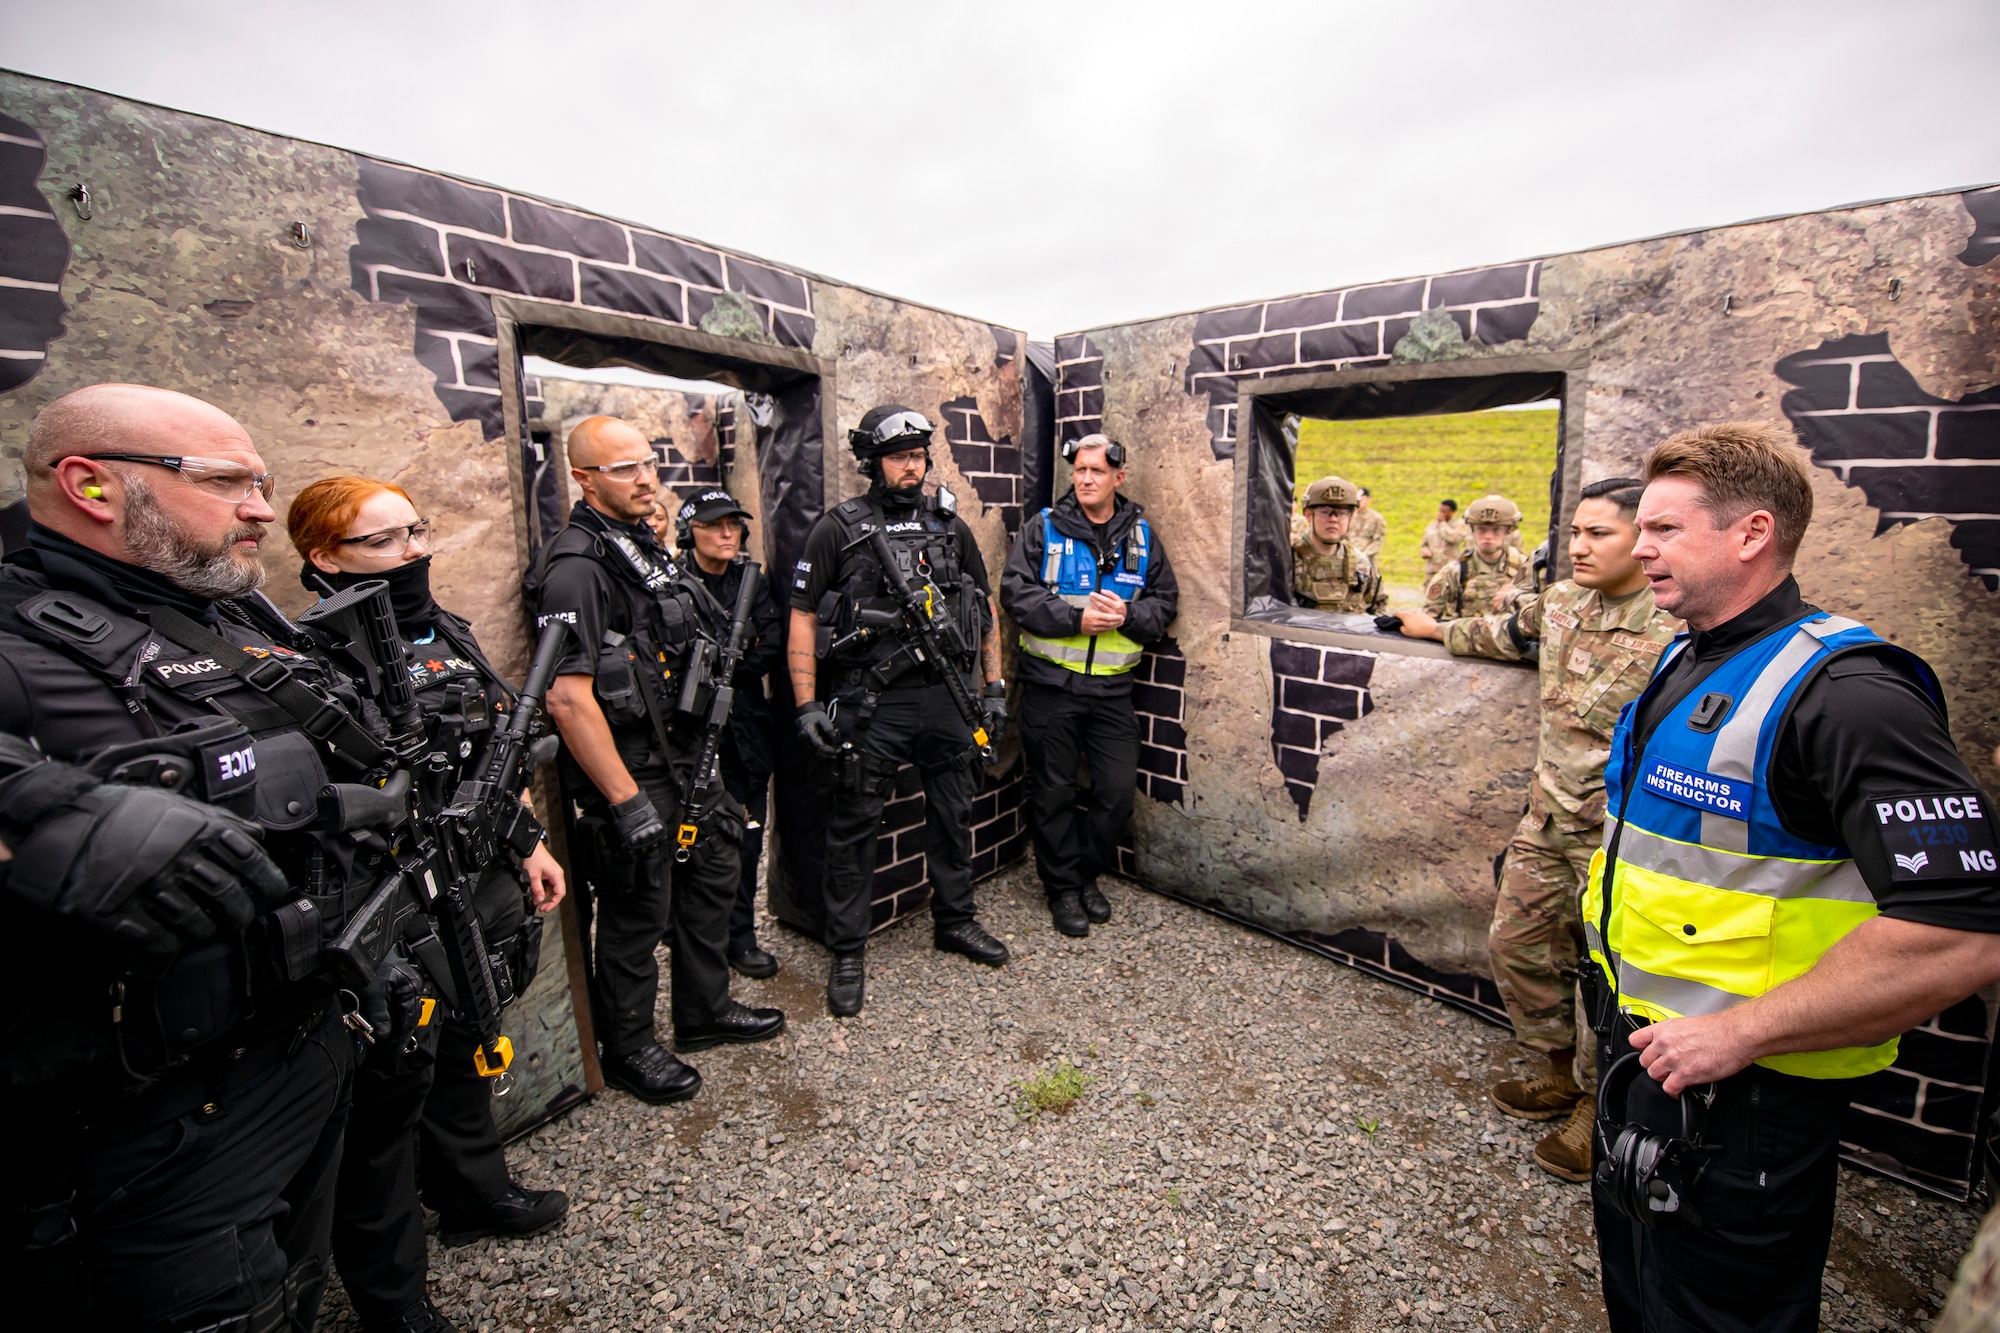 Northamptonshire Police Department sergeant Wayne Dowson, right, armed police training manager, speaks with police officers from the NHPD and Airmen from the 422nd Security Forces Squadron after a tri-agency active shooter response exercise at RAF Croughton, England, June 30, 2021. Airmen from the 422nd SFS along with police officers from the NHPD and Ministry of Defense, participated in multiple exercises to enhance their search and seizure tactics, strengthen local ties and gain rapport with their fellow officers. (U.S. Air Force photo by Senior Airman Eugene Oliver)